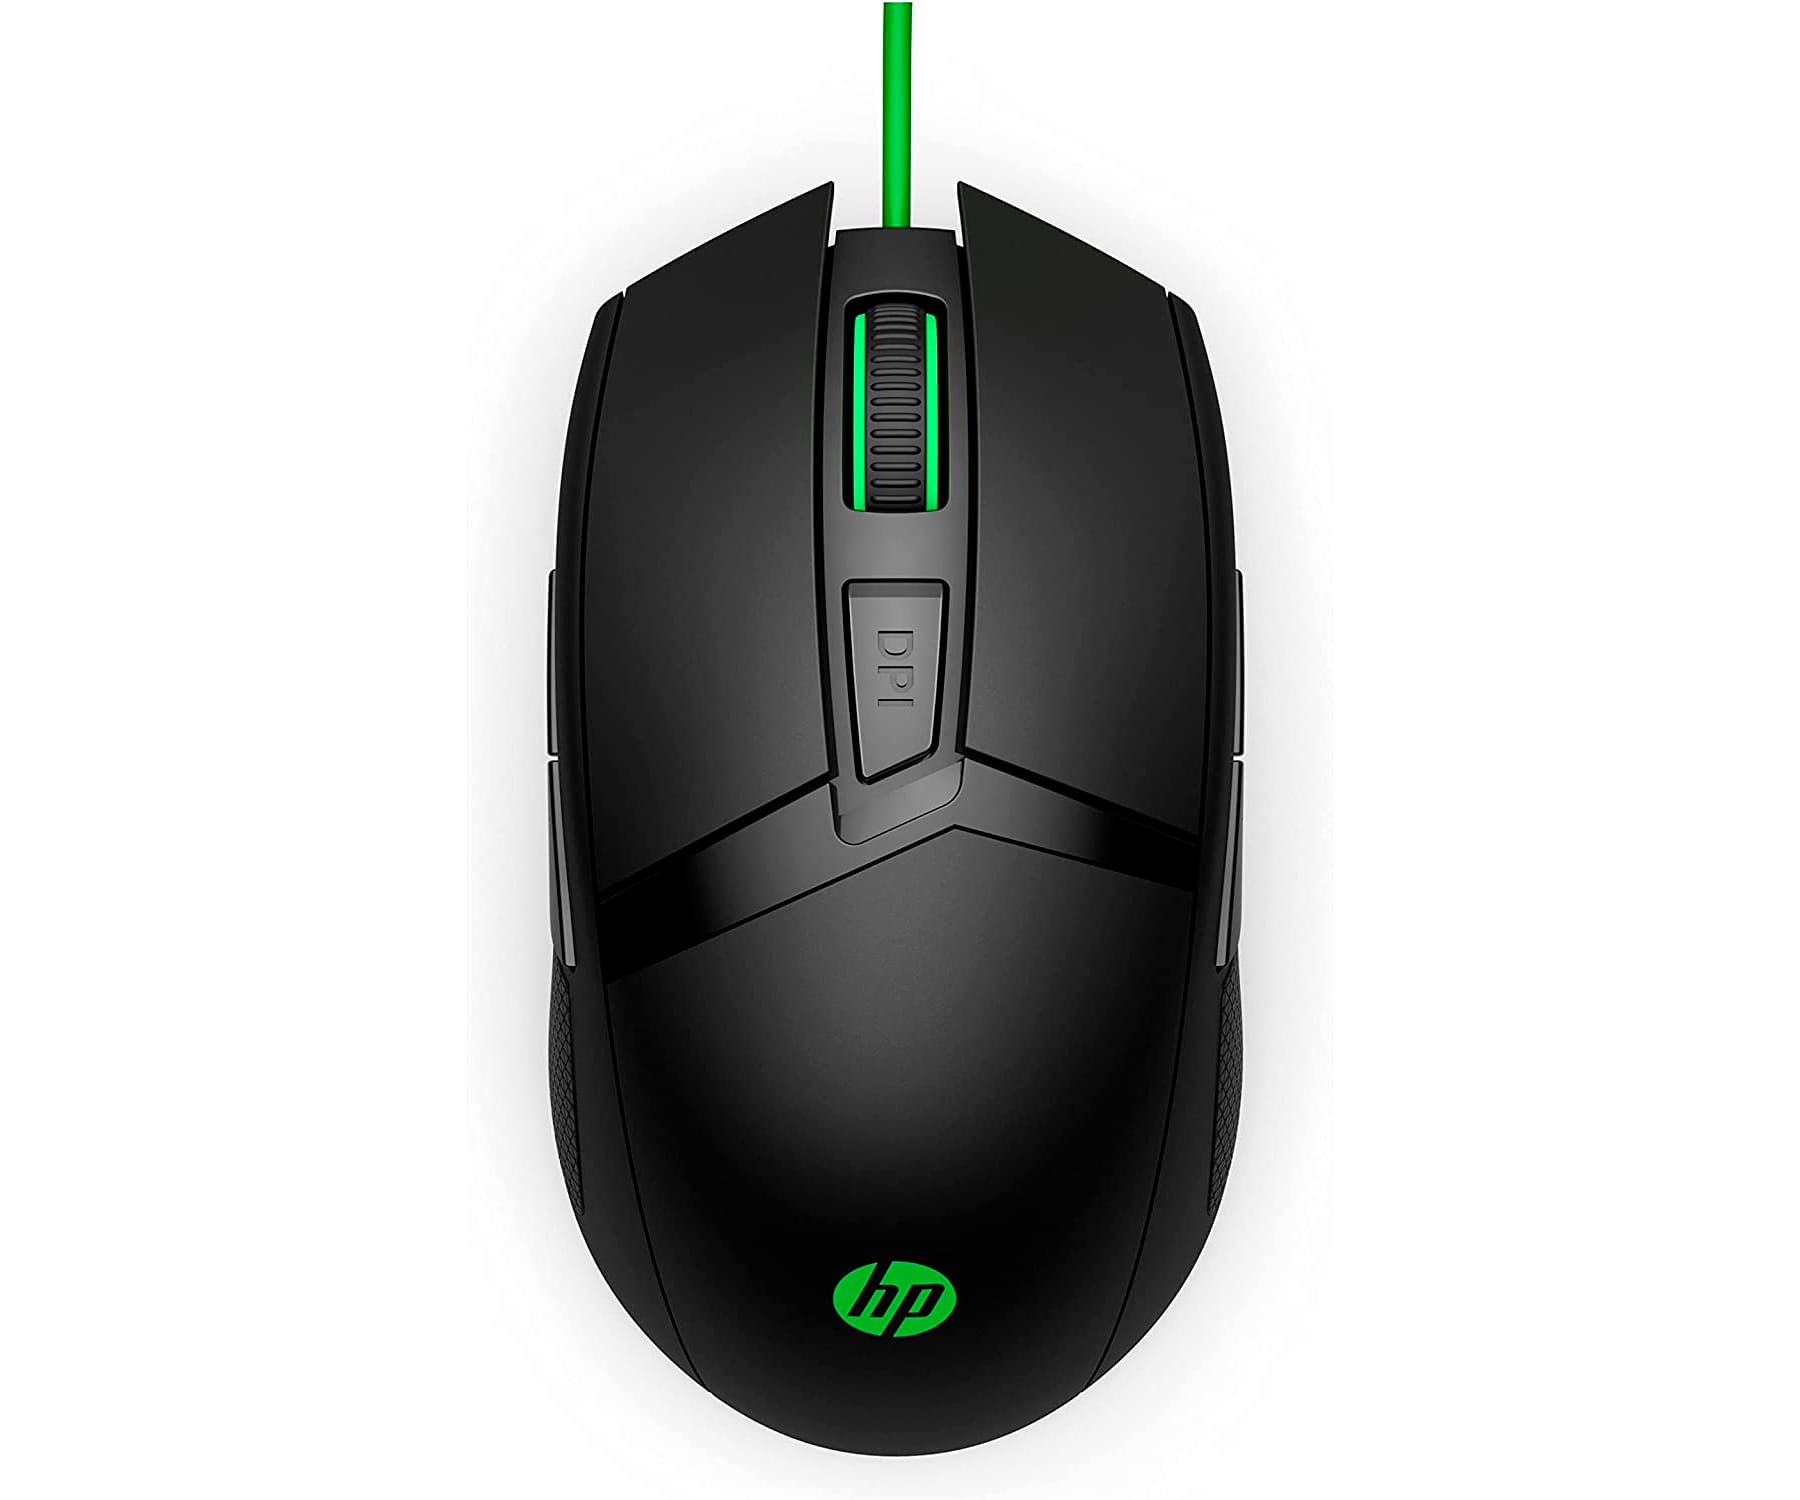 HP PAVILION GAMING MOUSE 300 / RATÓN GAMING CON CABLE USB